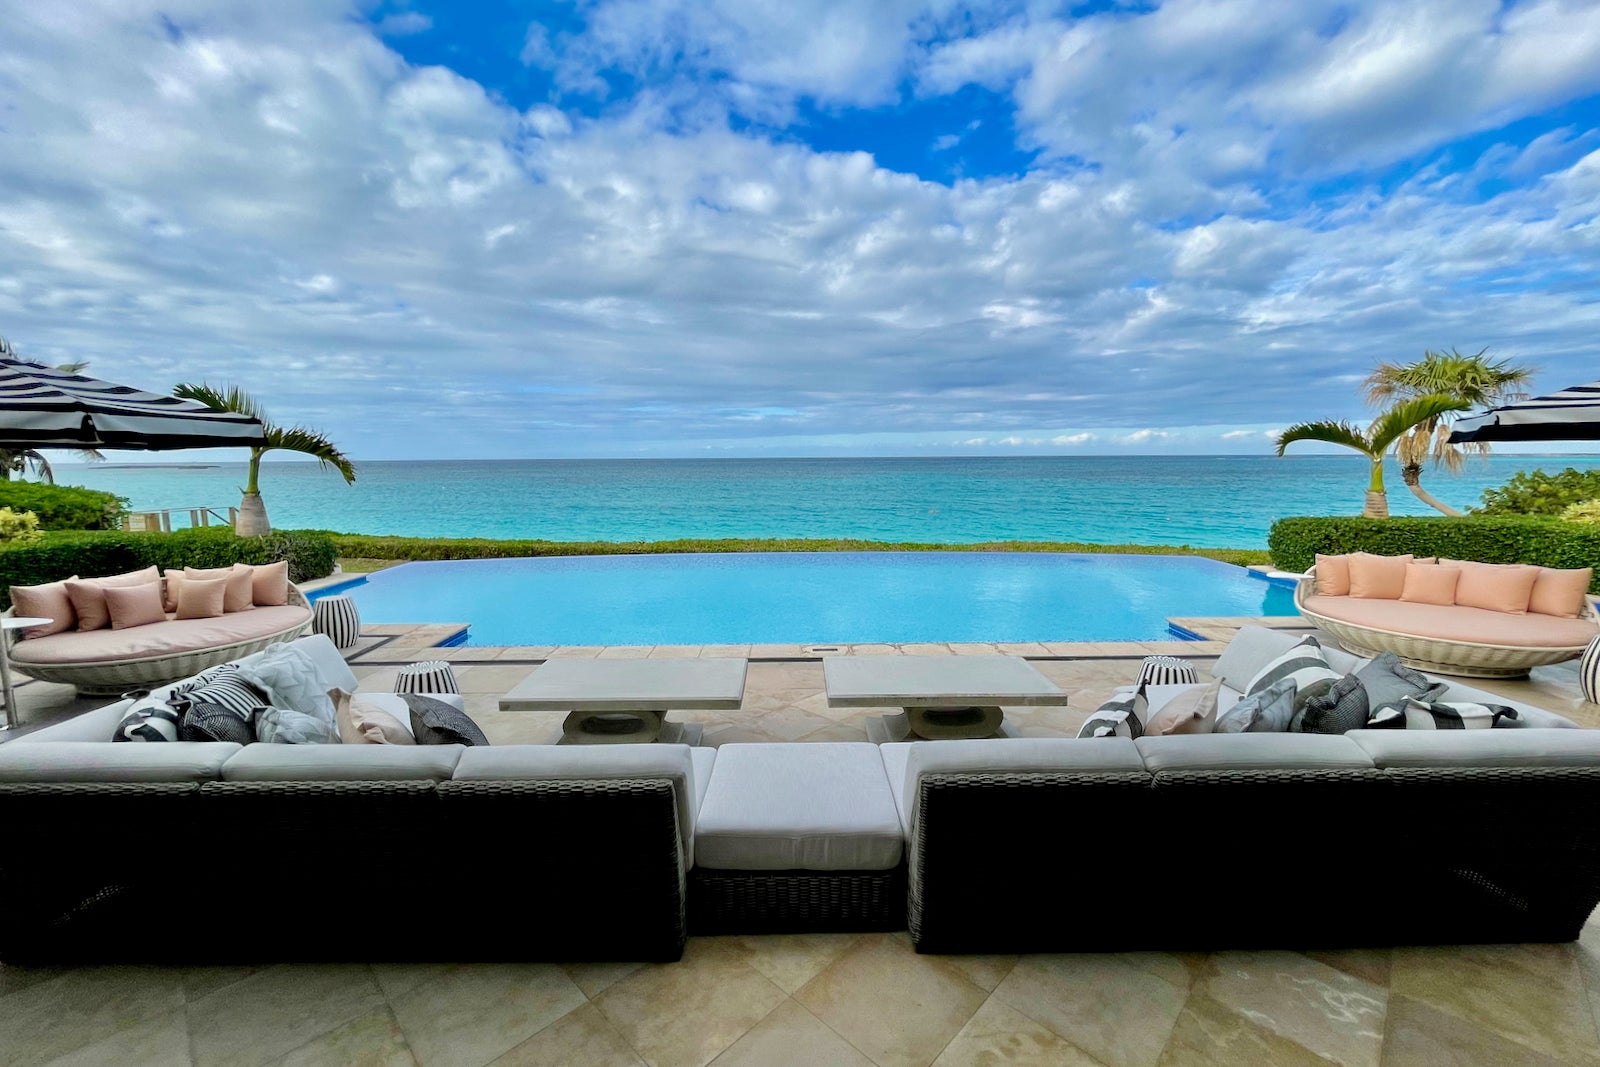 Bahamas blowout: Inside the $17,000-per-night Four Seasons villa fit for royalty